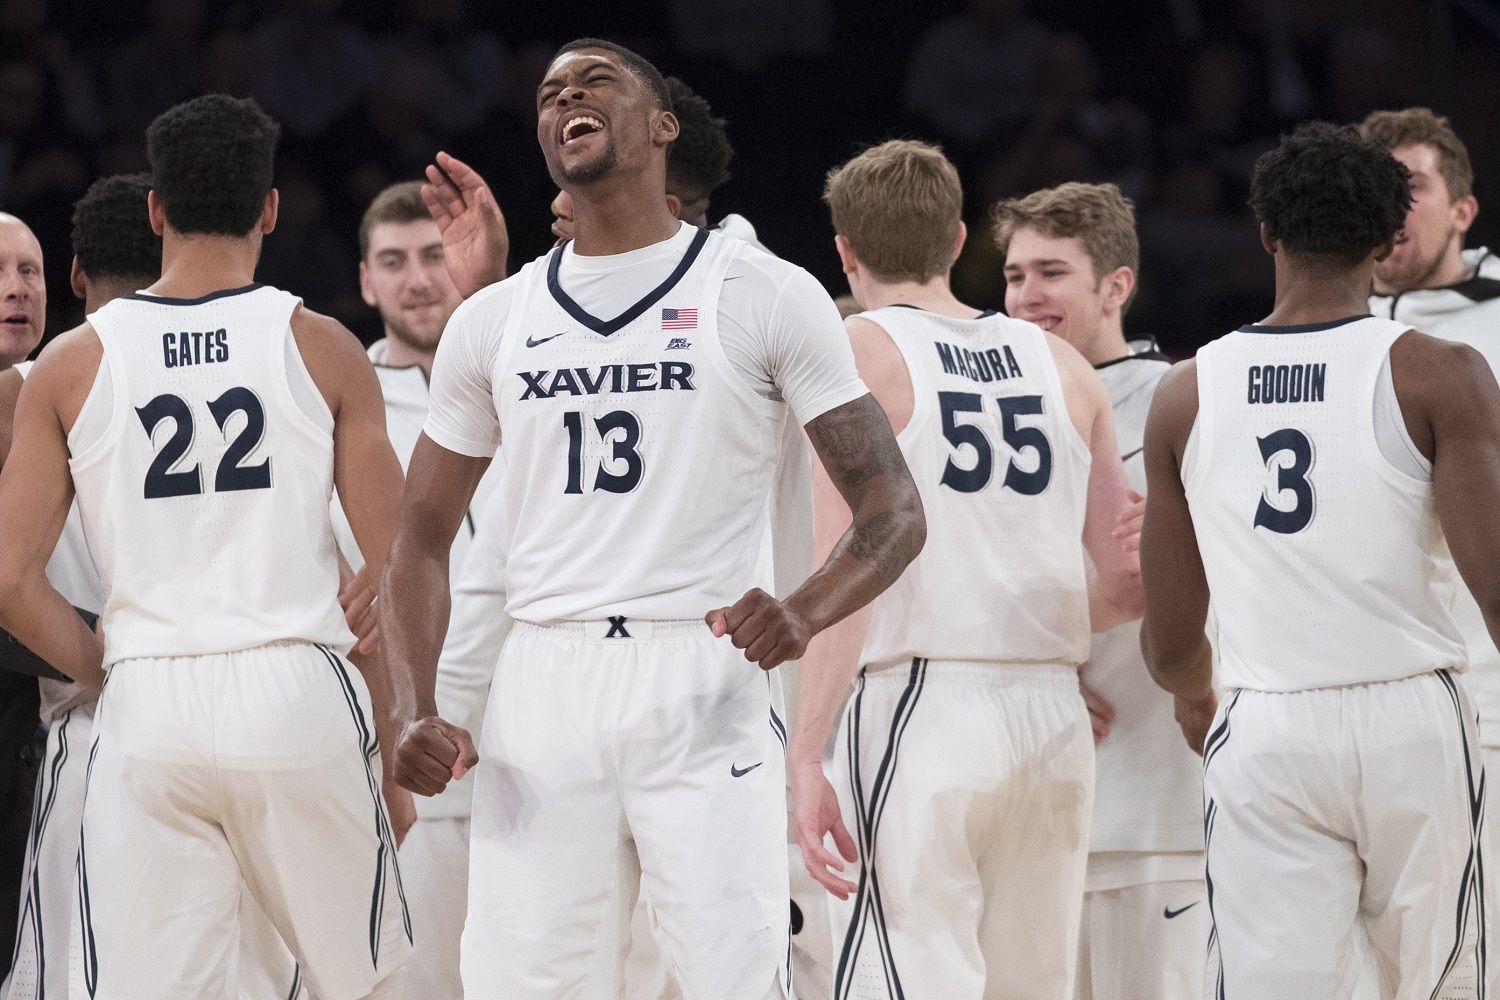 Xavier forward Naji Marshall (13) reacts during a time out in the second half of an NCAA college basketball game against St. John's in the quarterfinals of the Big East conference tournament, Thursday, March 8, 2018, at Madison Square Garden in New York. Xavier won 88-60. (AP Photo/Mary Altaffer)